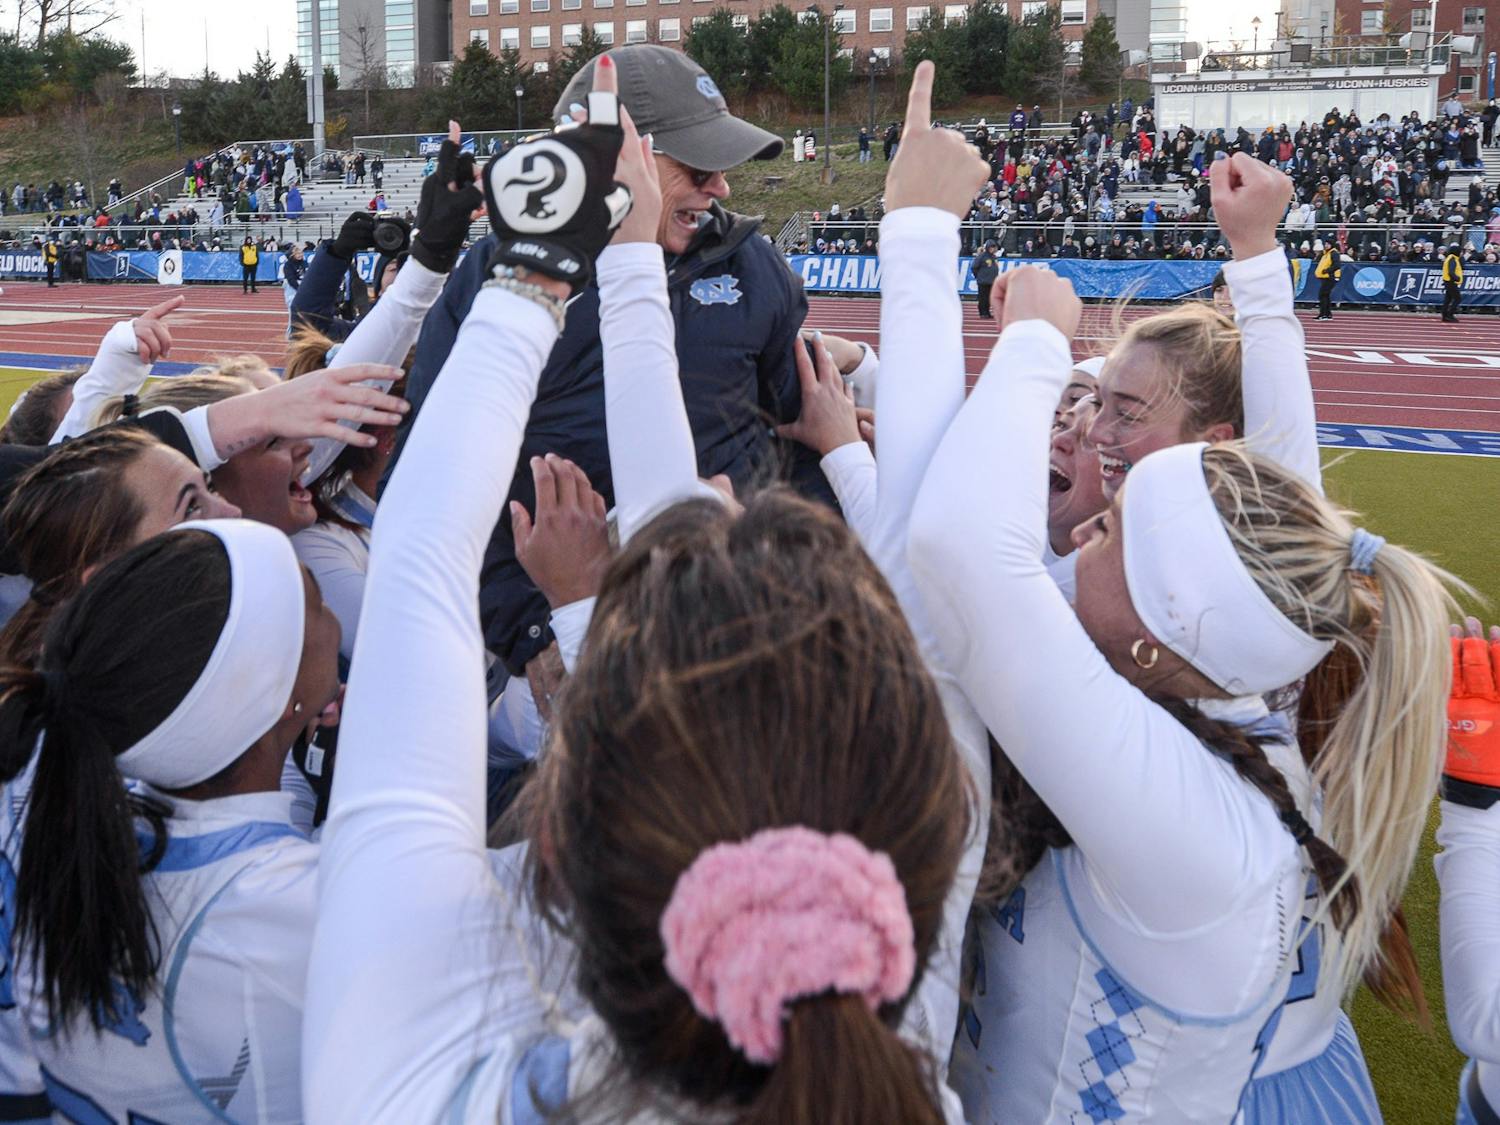 The UNC field hockey team lifts head coach Karen Shelton while celebrating their victory after the NCAA Field Hockey Championship game against Northwestern in Storrs, Conn. on Sunday, Nov. 20, 2022. UNC beat Northwestern 2-1.